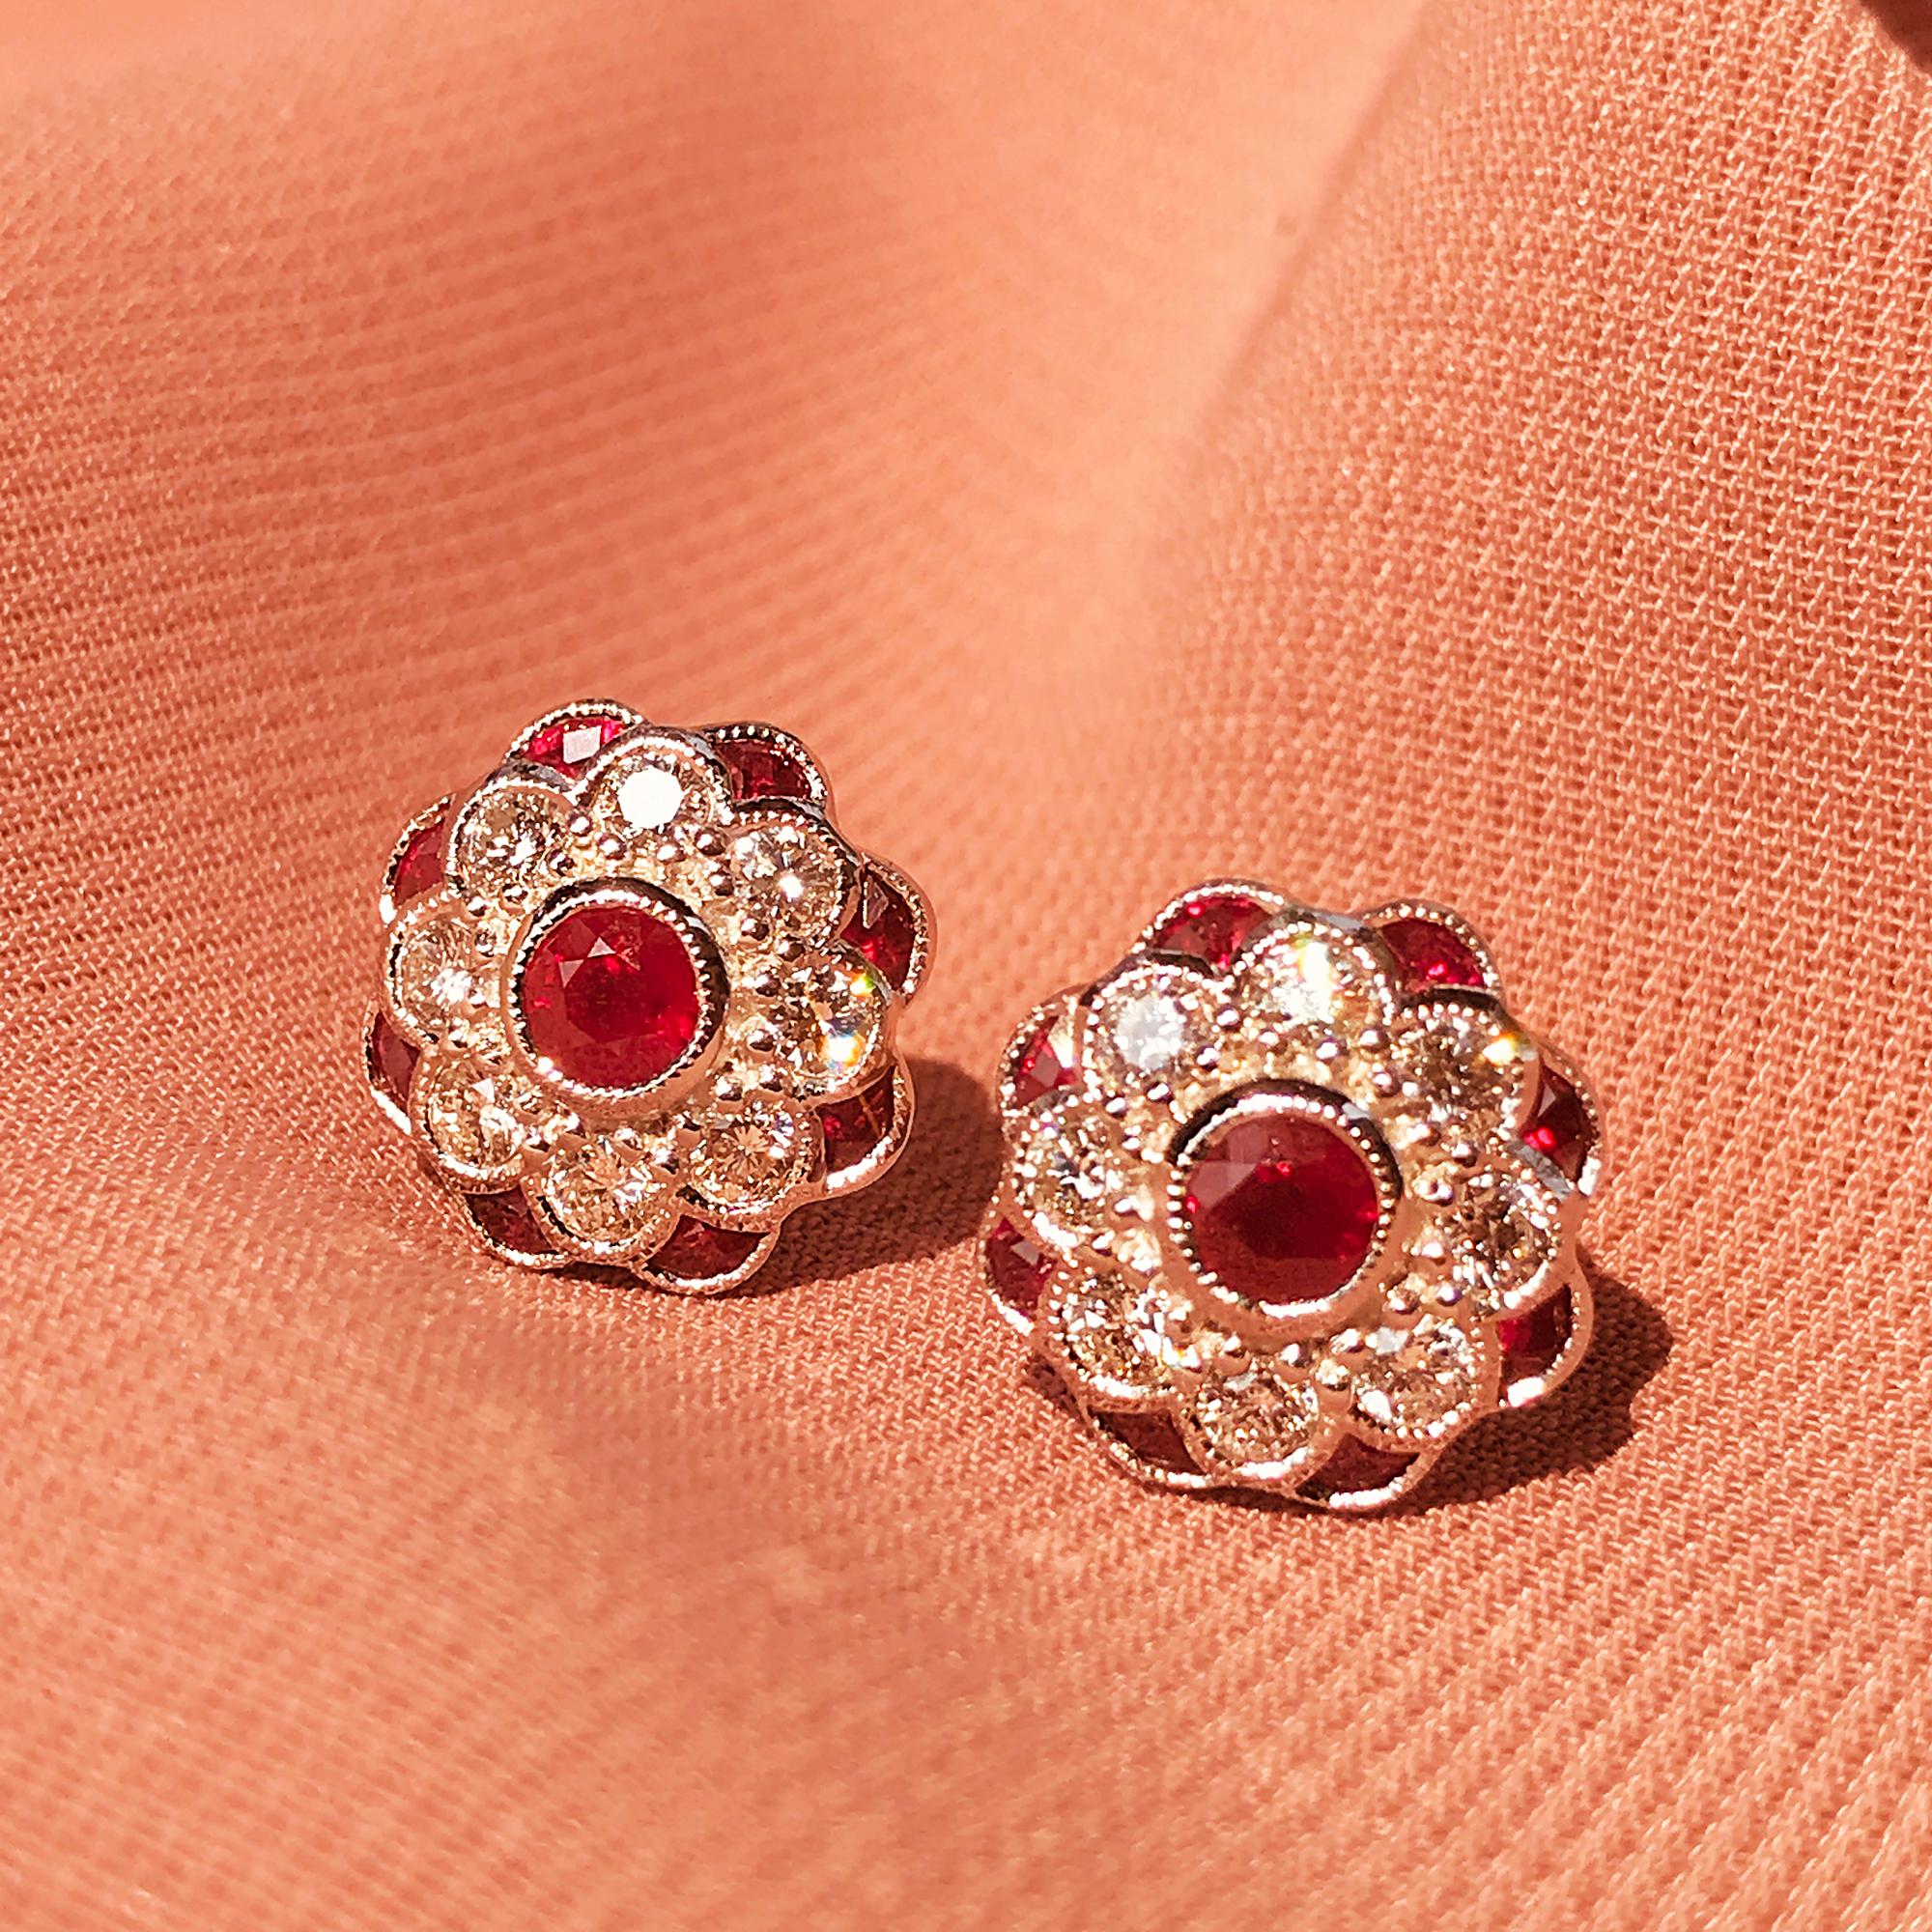 With a gorgeous design that includes a ruby center with diamond and ruby petals of peony flower design, these art-deco style earrings are ready to bloom on you. 

Information
Metal: 14K White Gold
Width: 12 mm.
Length: 12 mm.
Weight: 4.20 g.